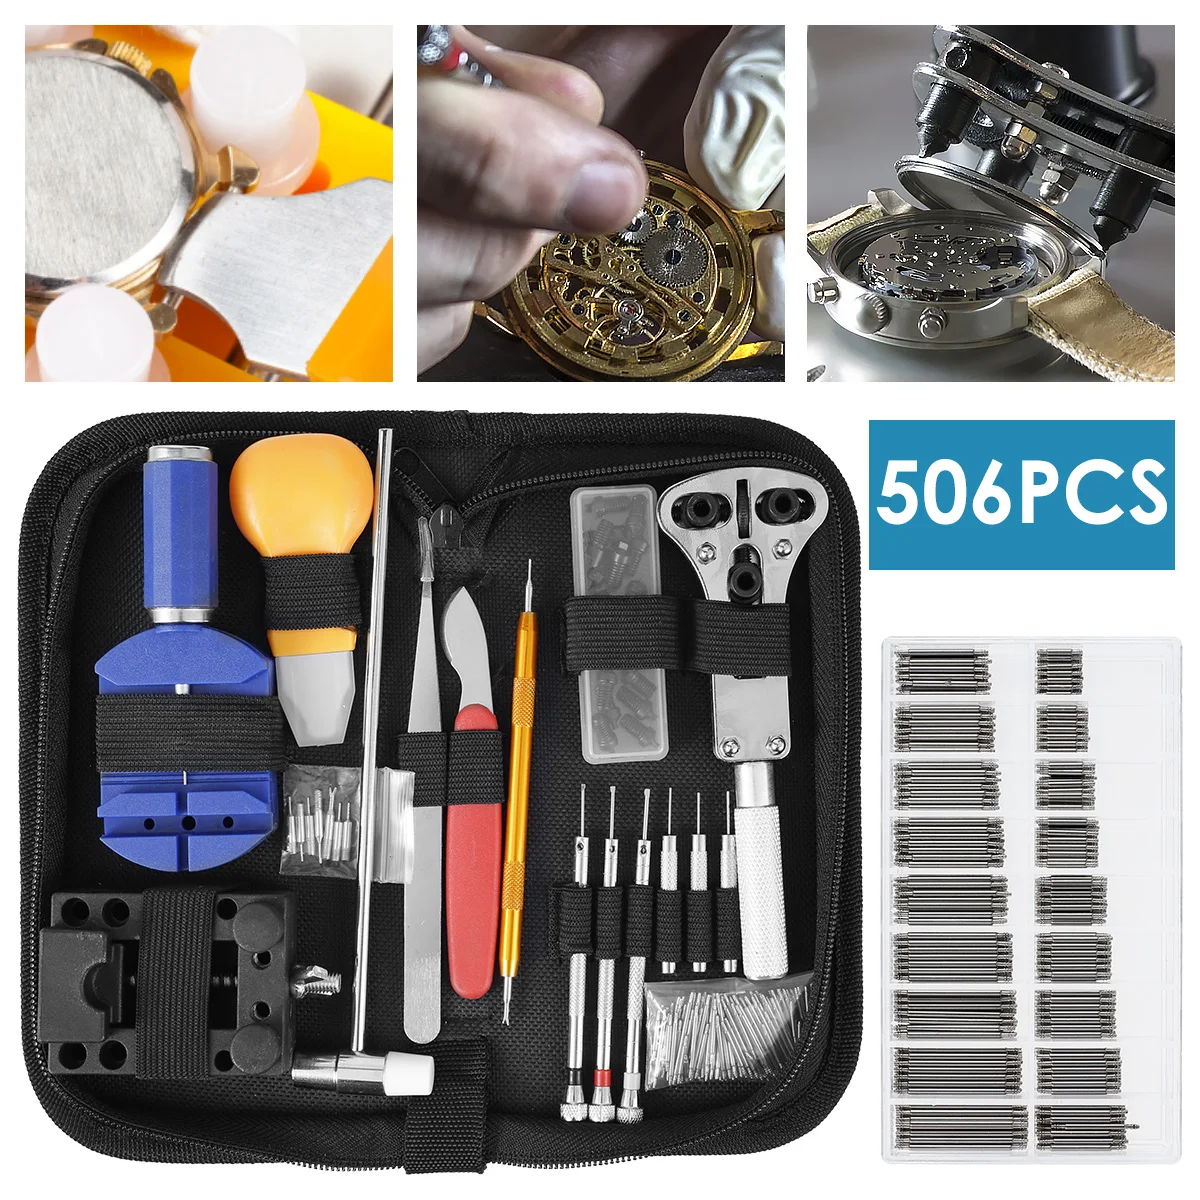 

506Pcs Watch Repair Kit Professional Watch Repair Tools Portable Watch Back Case Opener Remover Manual Spring Bar Tool Set with